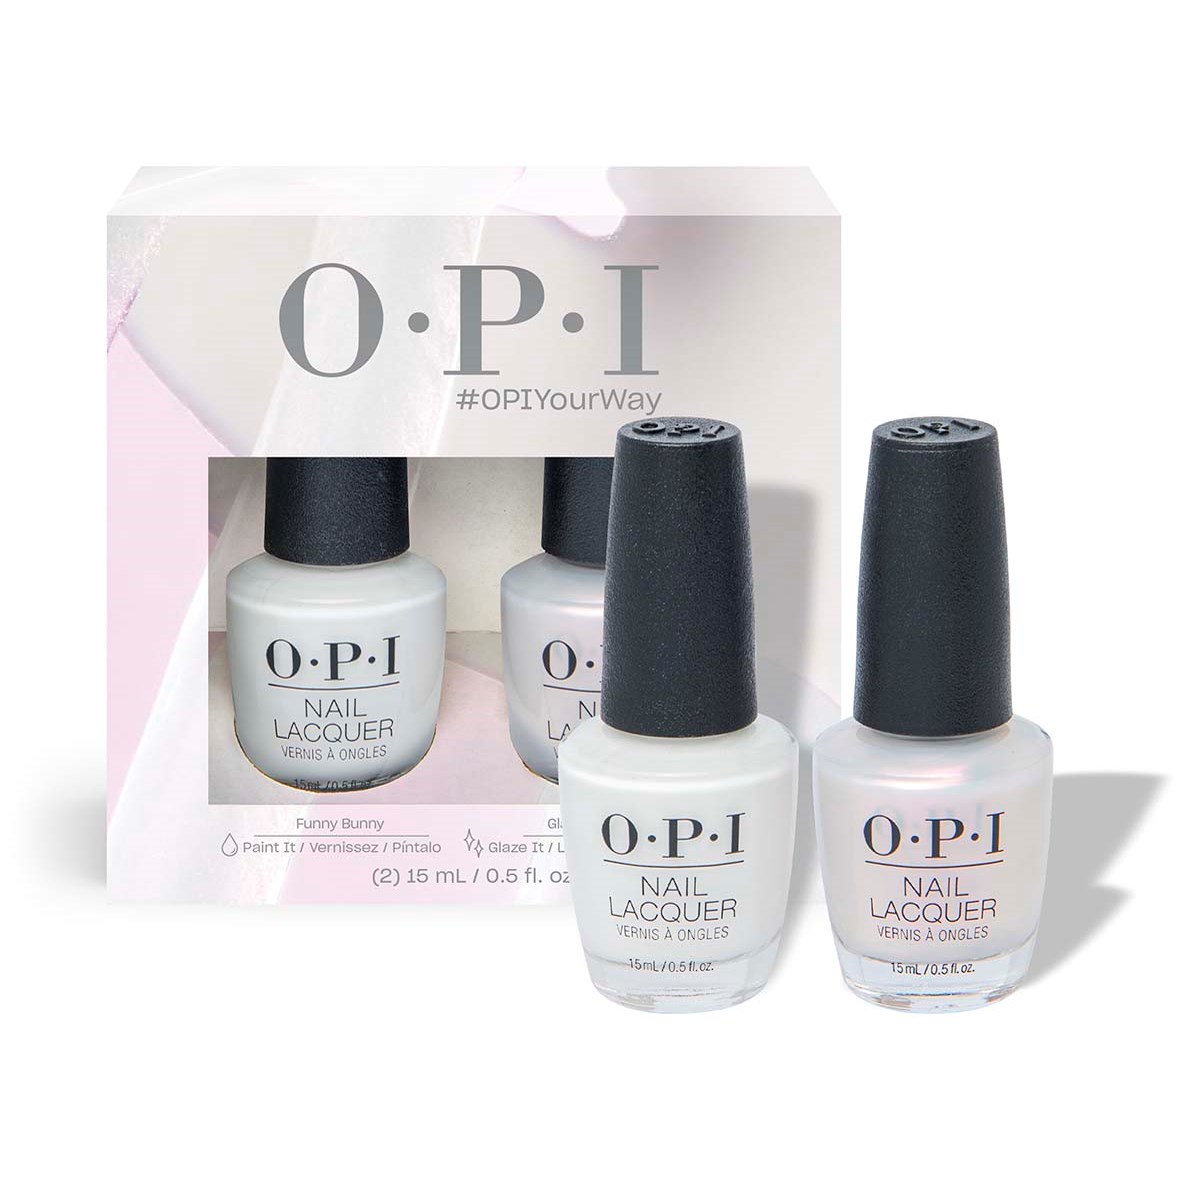 Opi Nail Lacquer Your Way Duo Pack